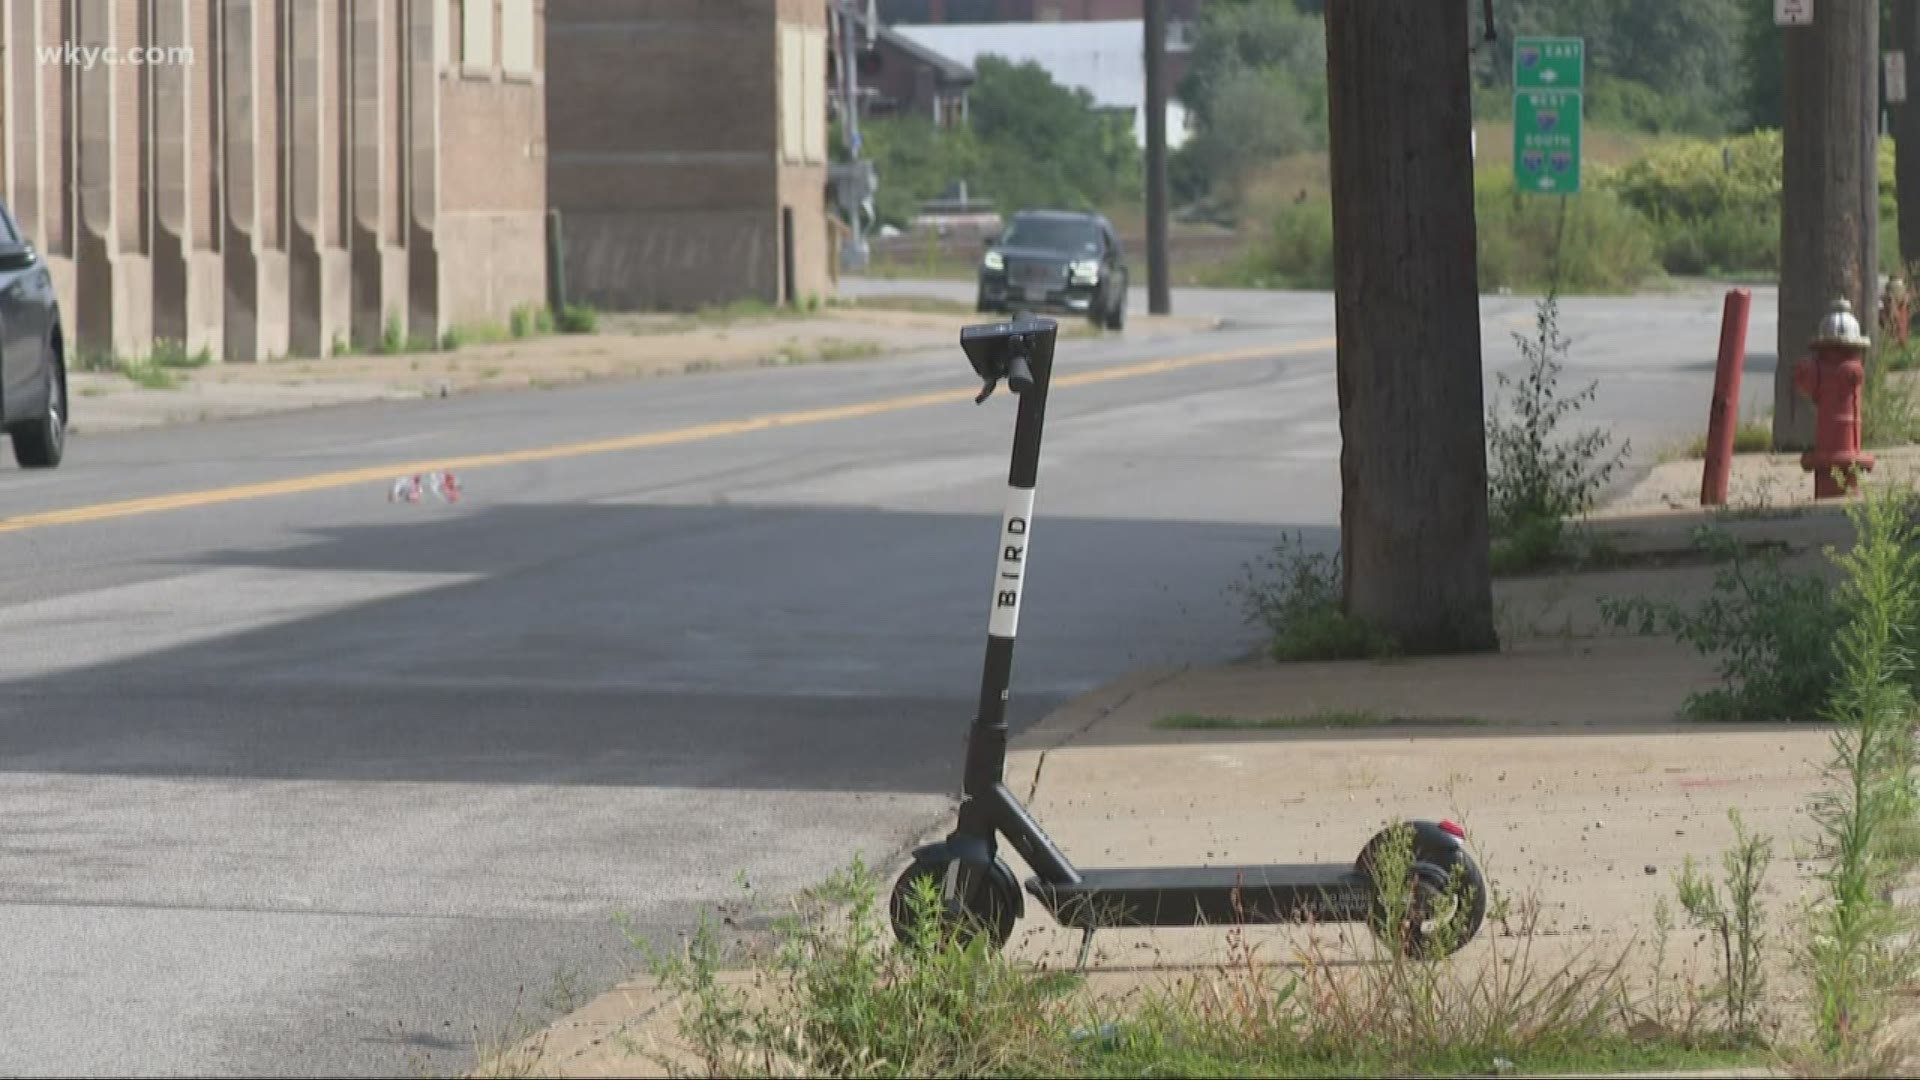 Electric scooters are all the rage right now. If you hit a person, crash into a car or damage someone else’s property, 3News discovered you’re likely on your own.